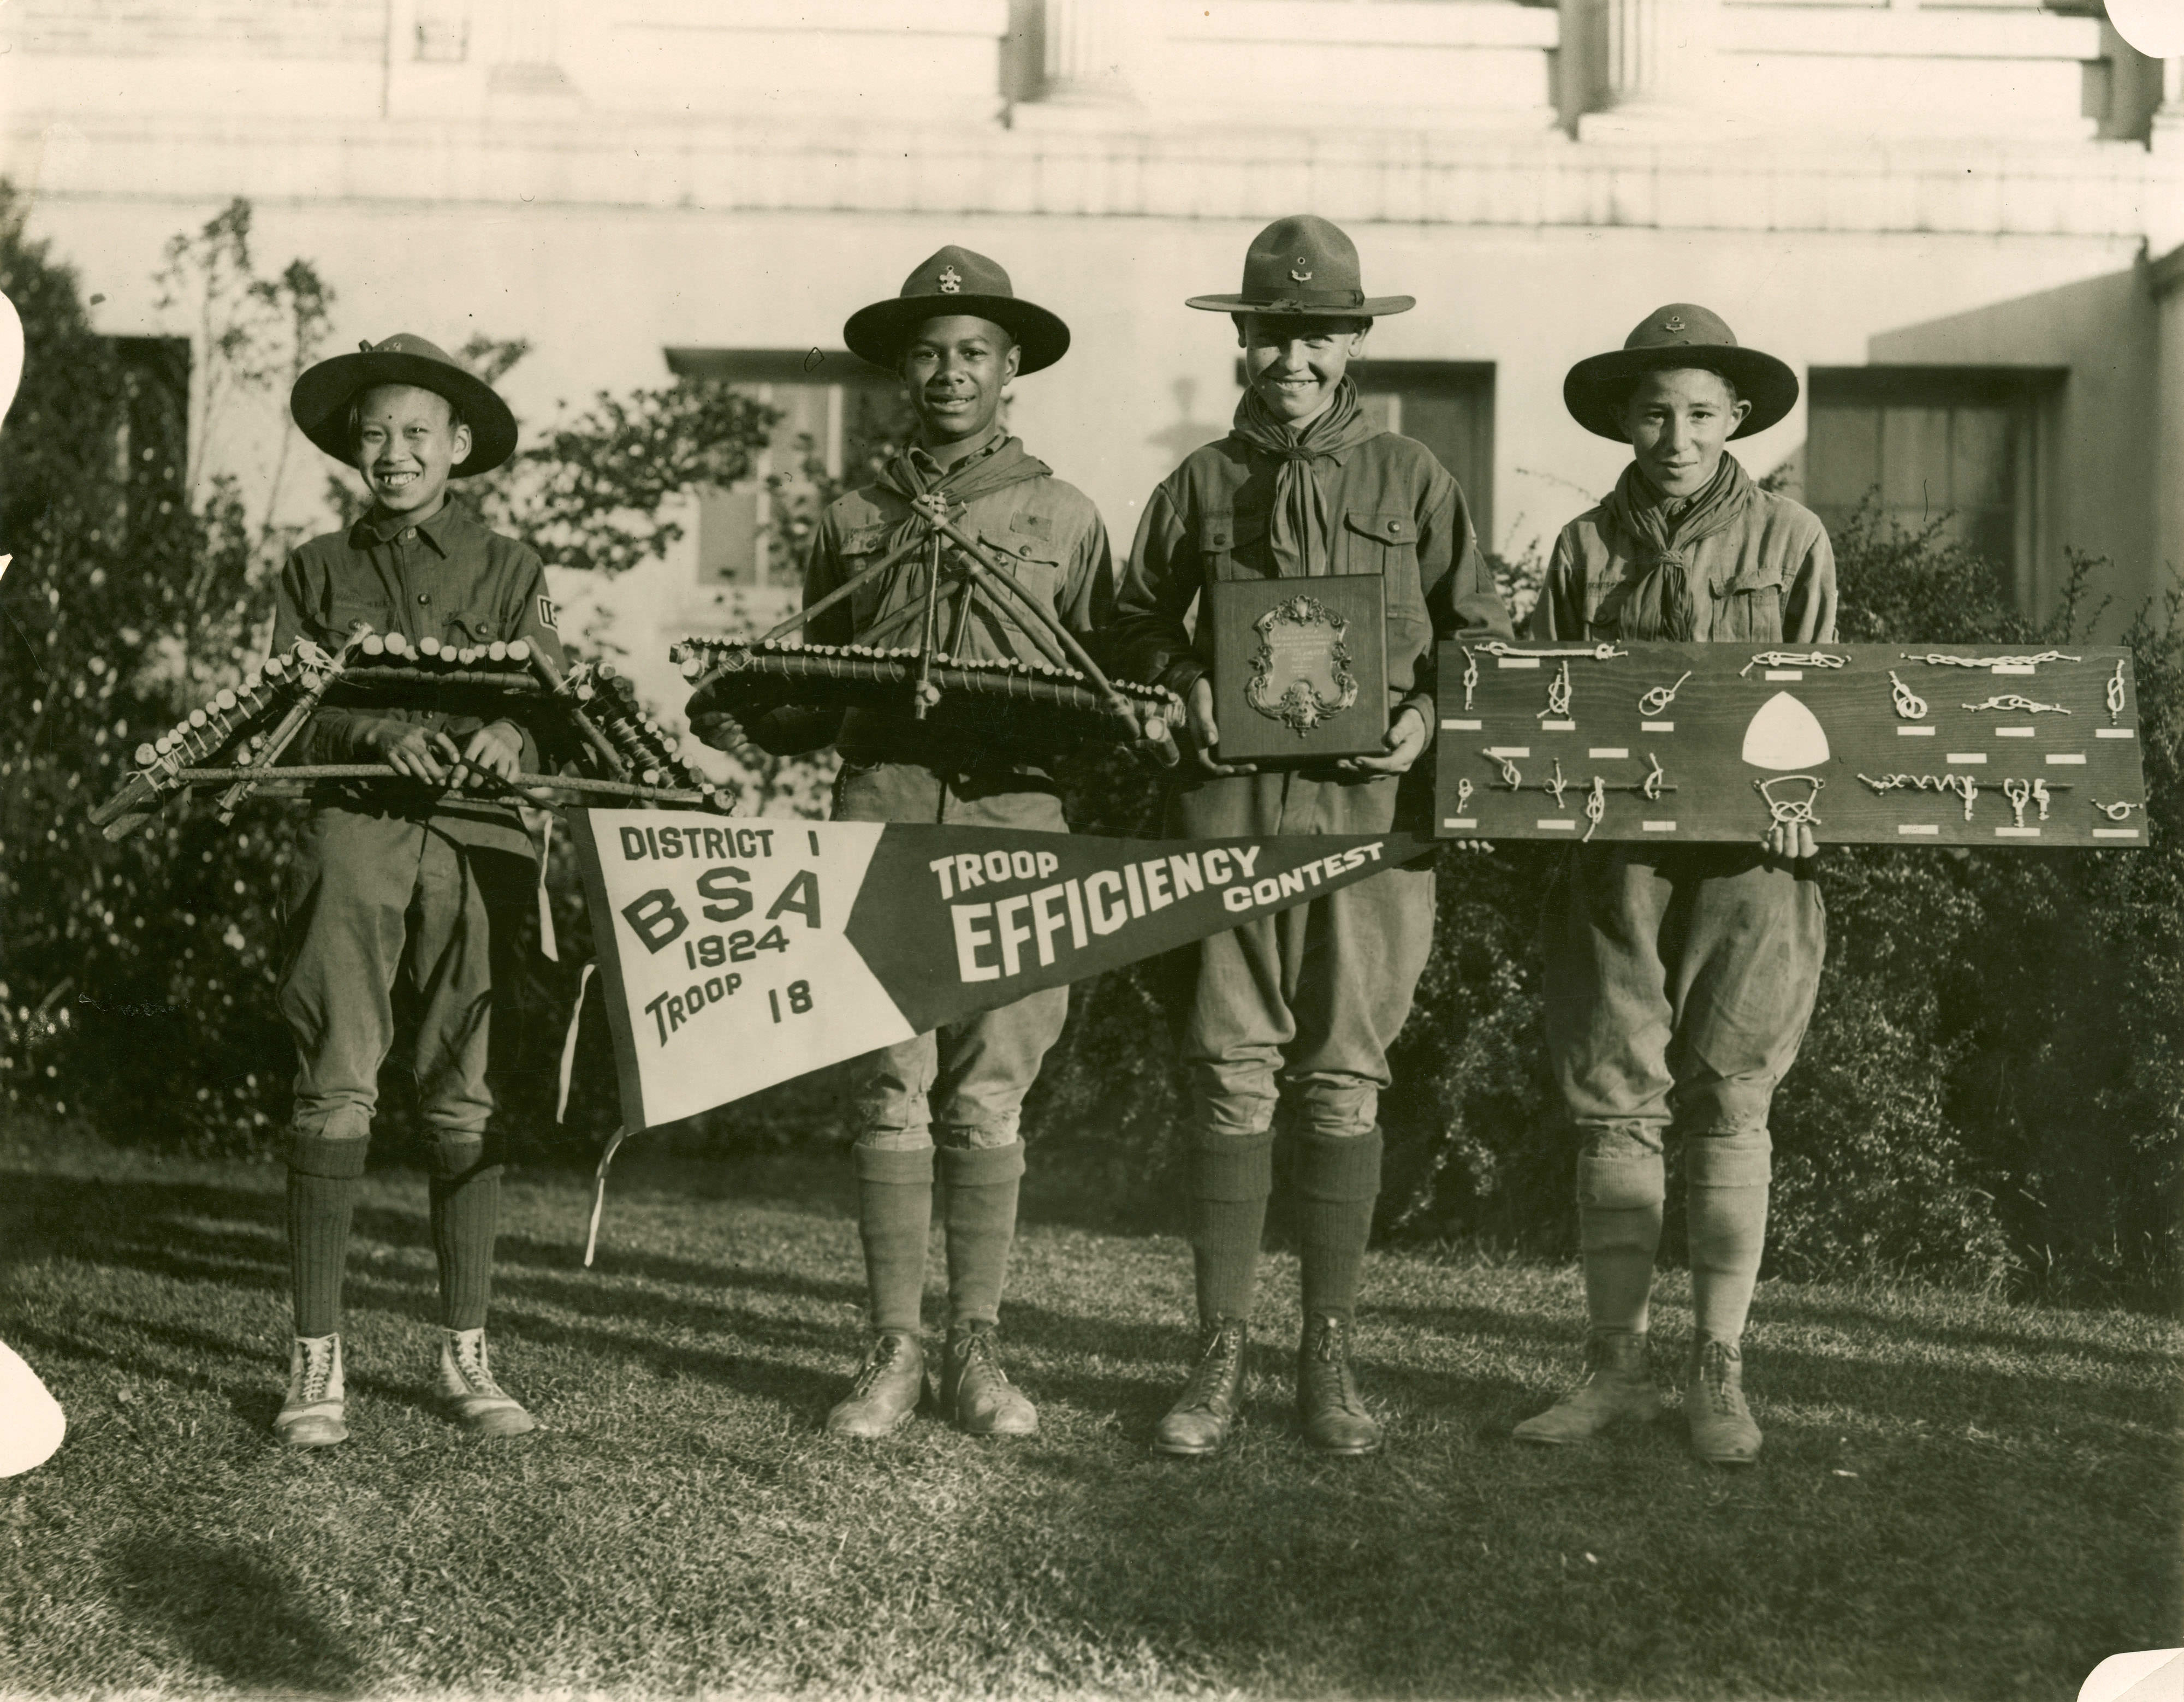 Winners in different Boy Scouts competitions proudly show their winning projects off in California, US in 1924. This was in an area that did not segregate the boy scouts, but many other states all over the US did as well as with everything else. Some states did not segregate most things, including schools and organizations, but most of the US, including many northern states did in fact segregate everything at this time. It would take 20+ years just for the military to desegregate, and another 45+ years for buses, specific jobs, schools and everything else to desegregate across the US as well.